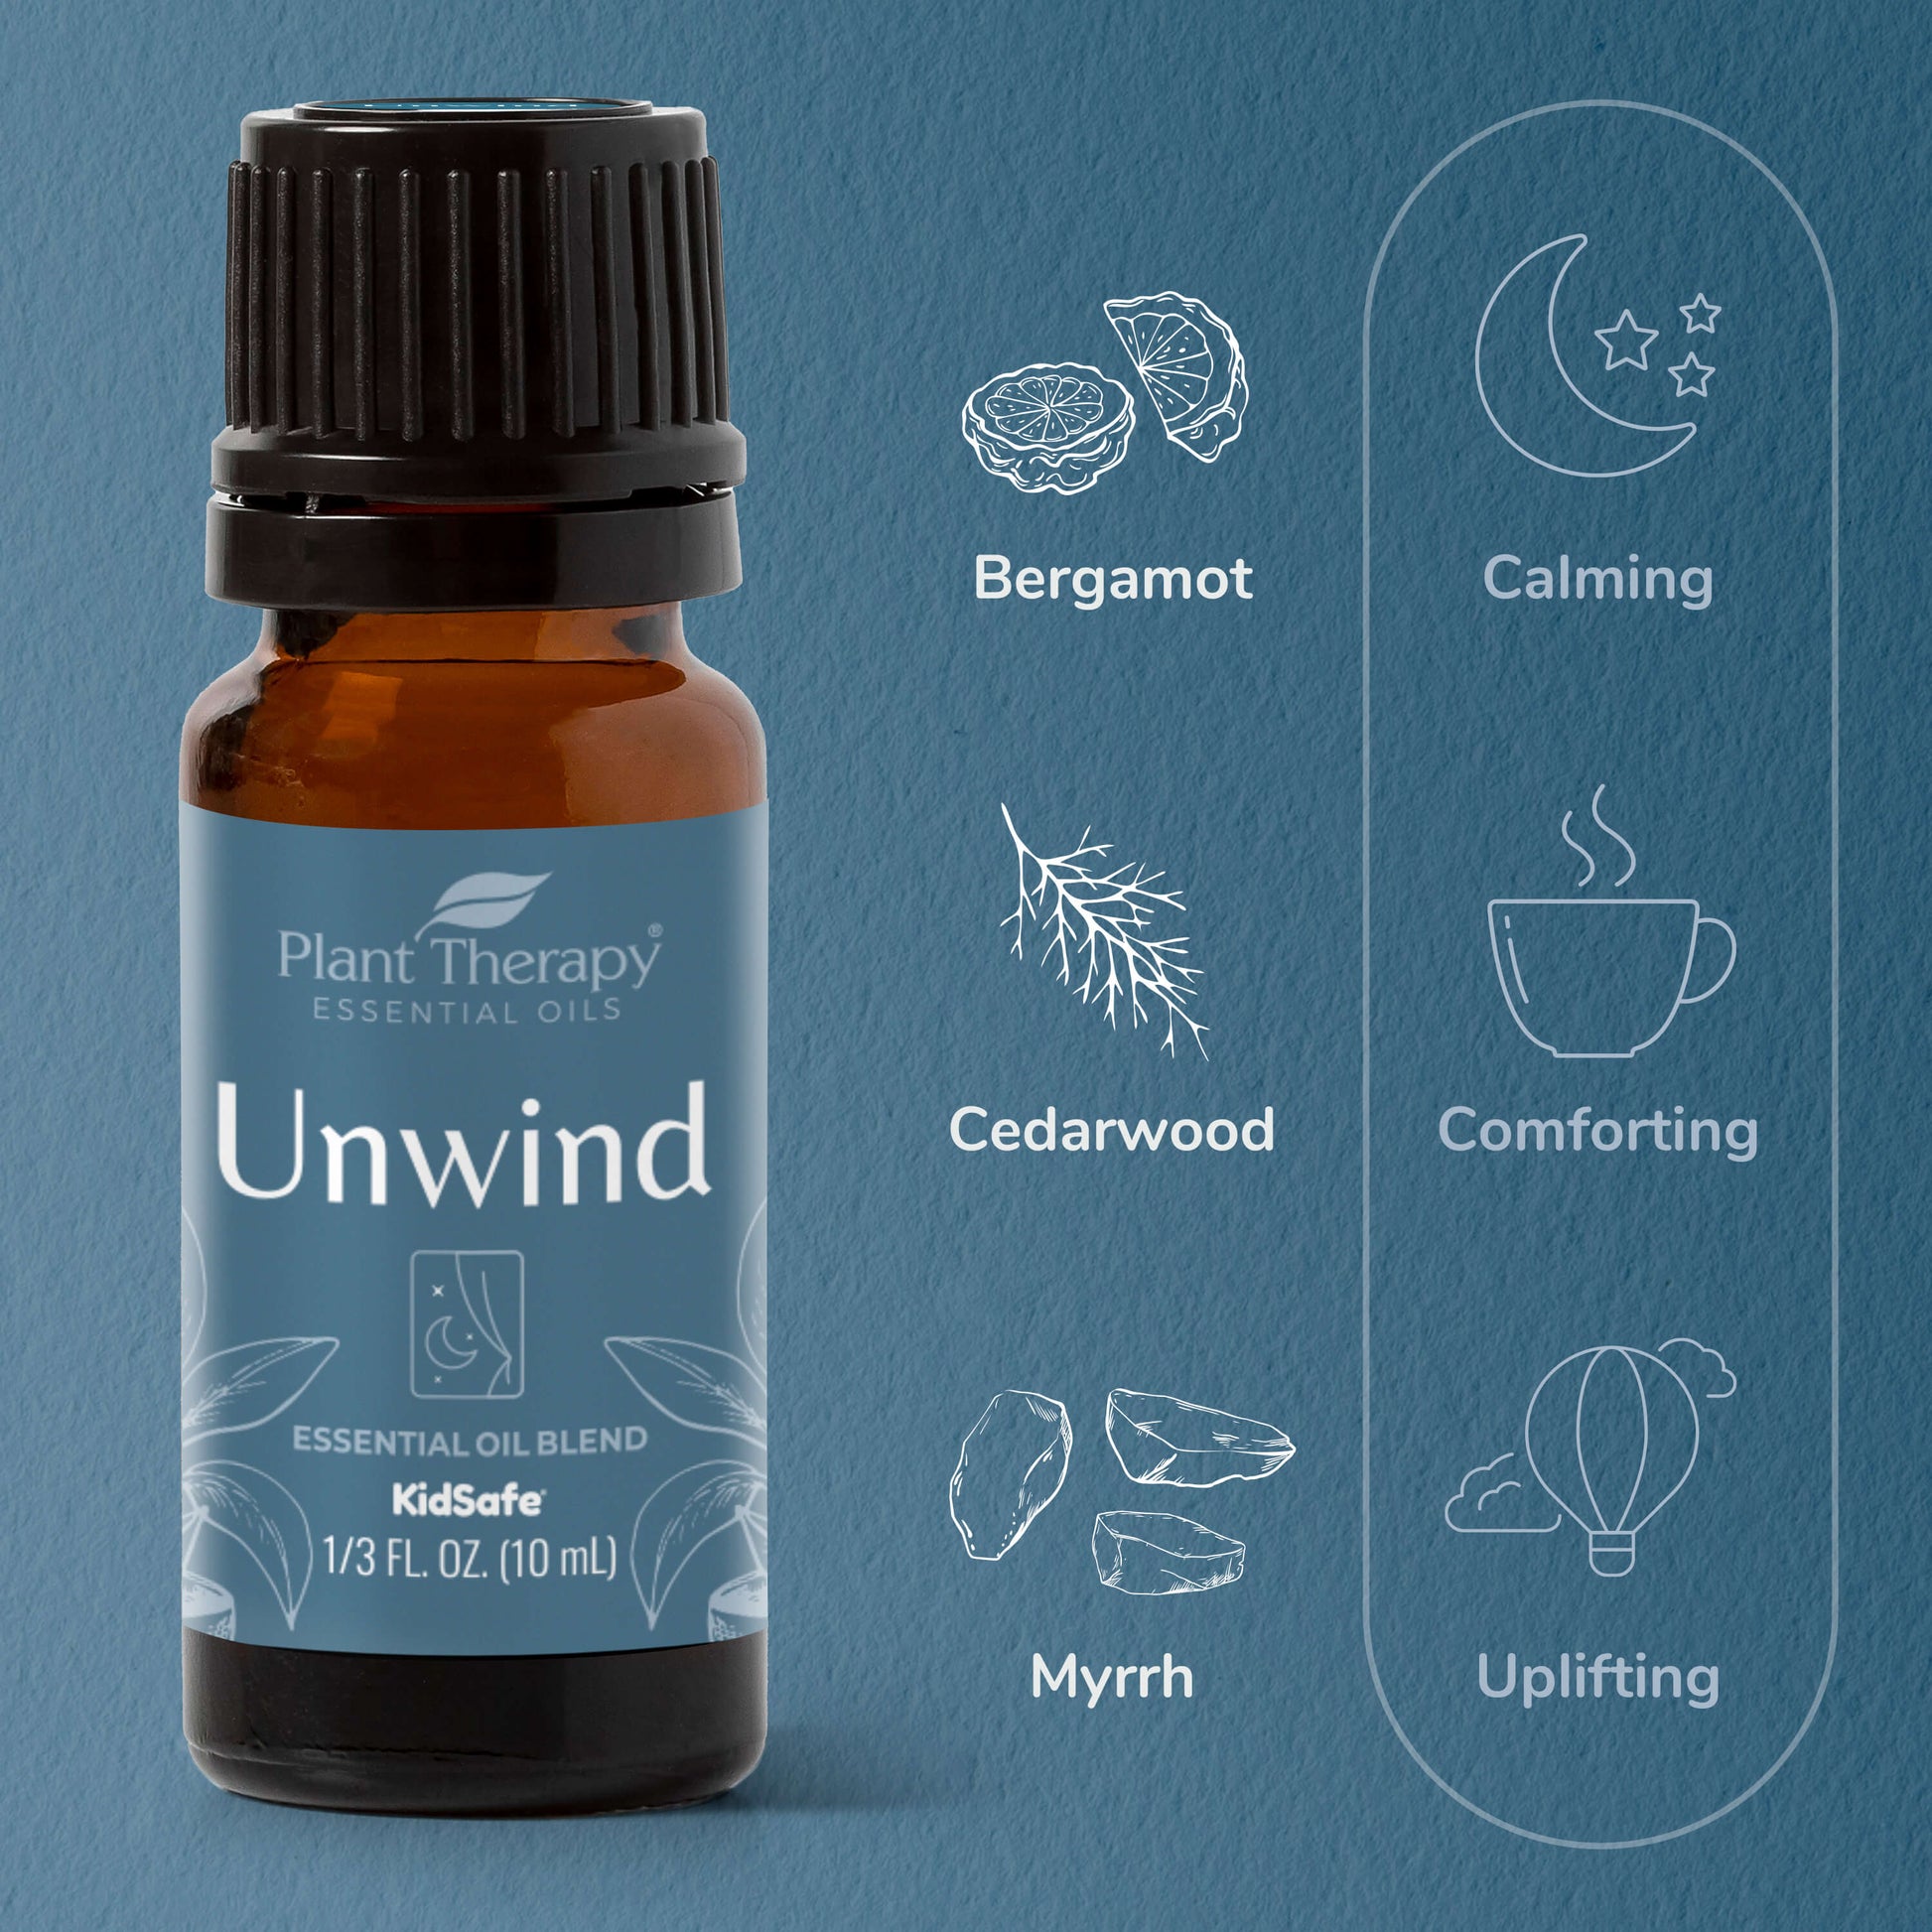 UNWIND ESSENTIAL OIL BLEND | Joy of Oiling - Plant Therapy Malaysia | The Nature of Things Malaysia